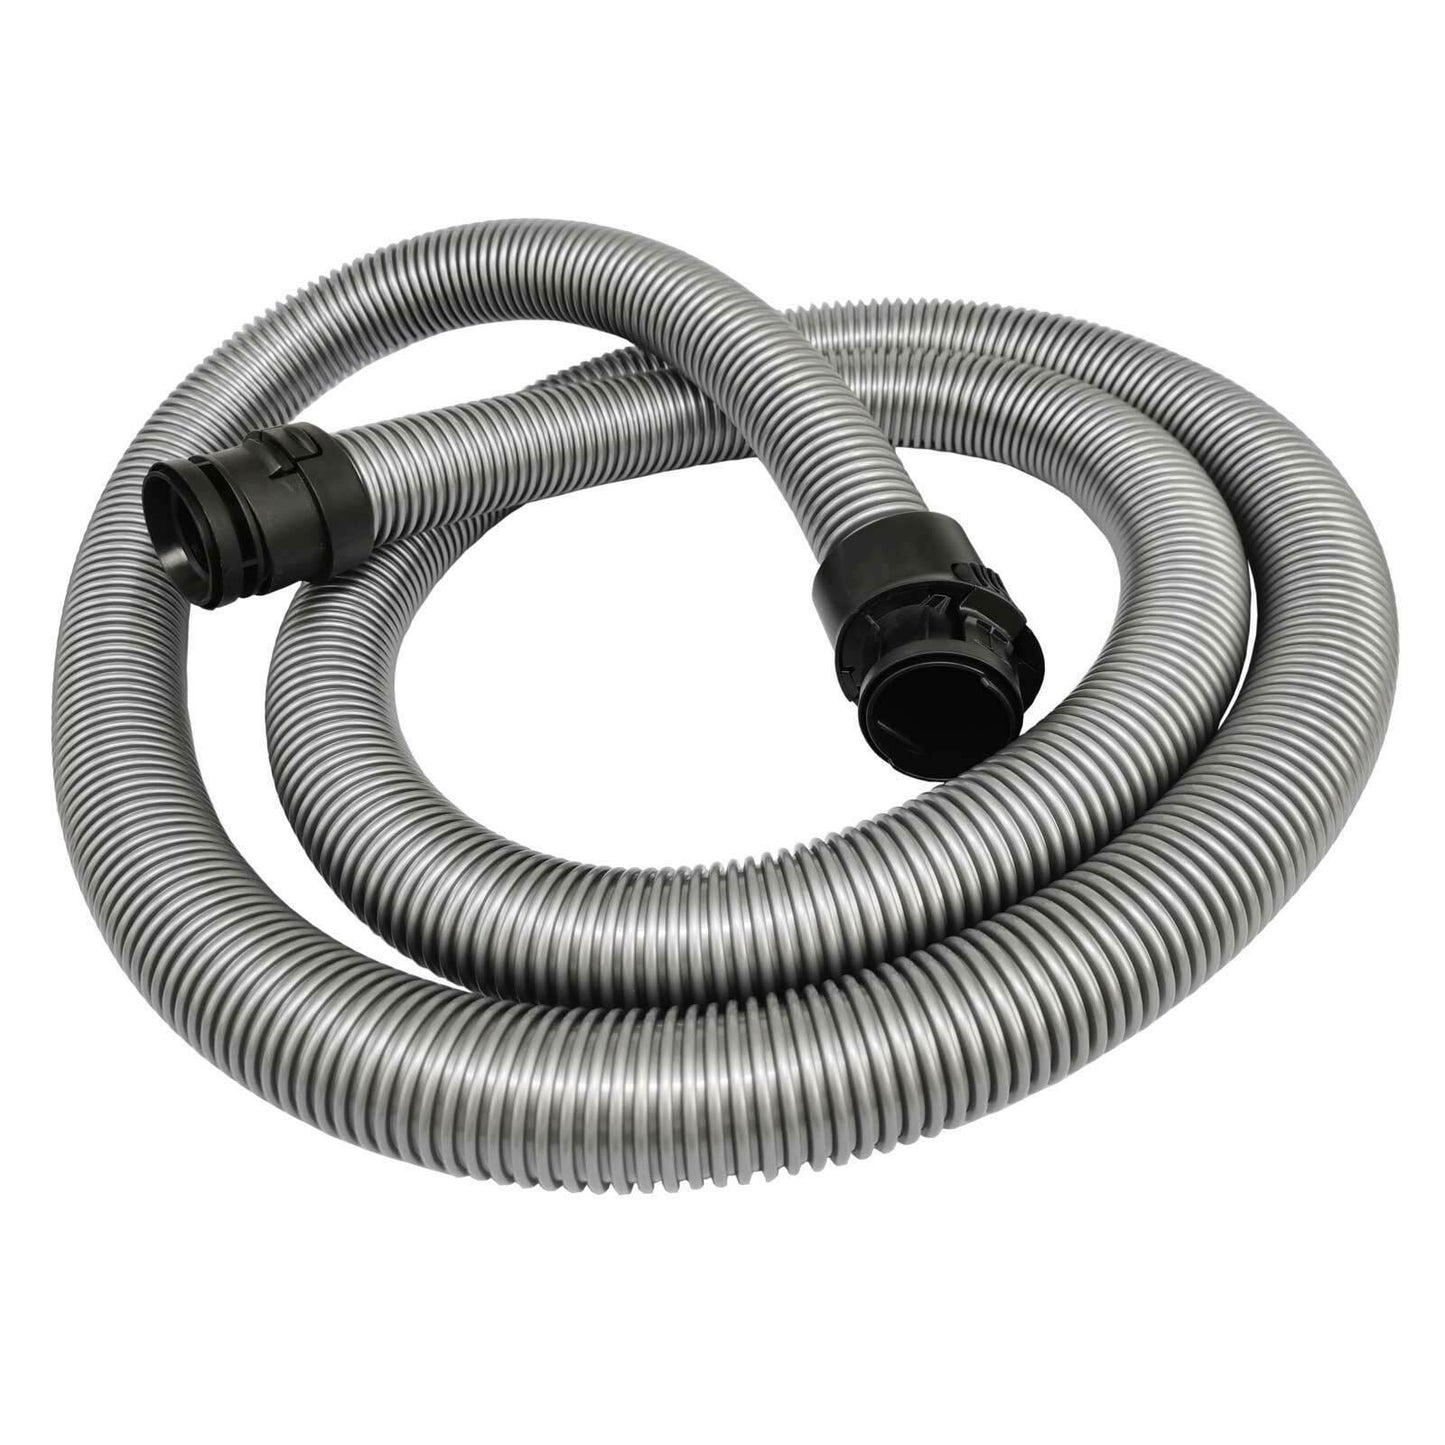 Flexible Suction Hose 2.5 Meter For Miele Compact C2 S8 S6000 Series Sparesbarn